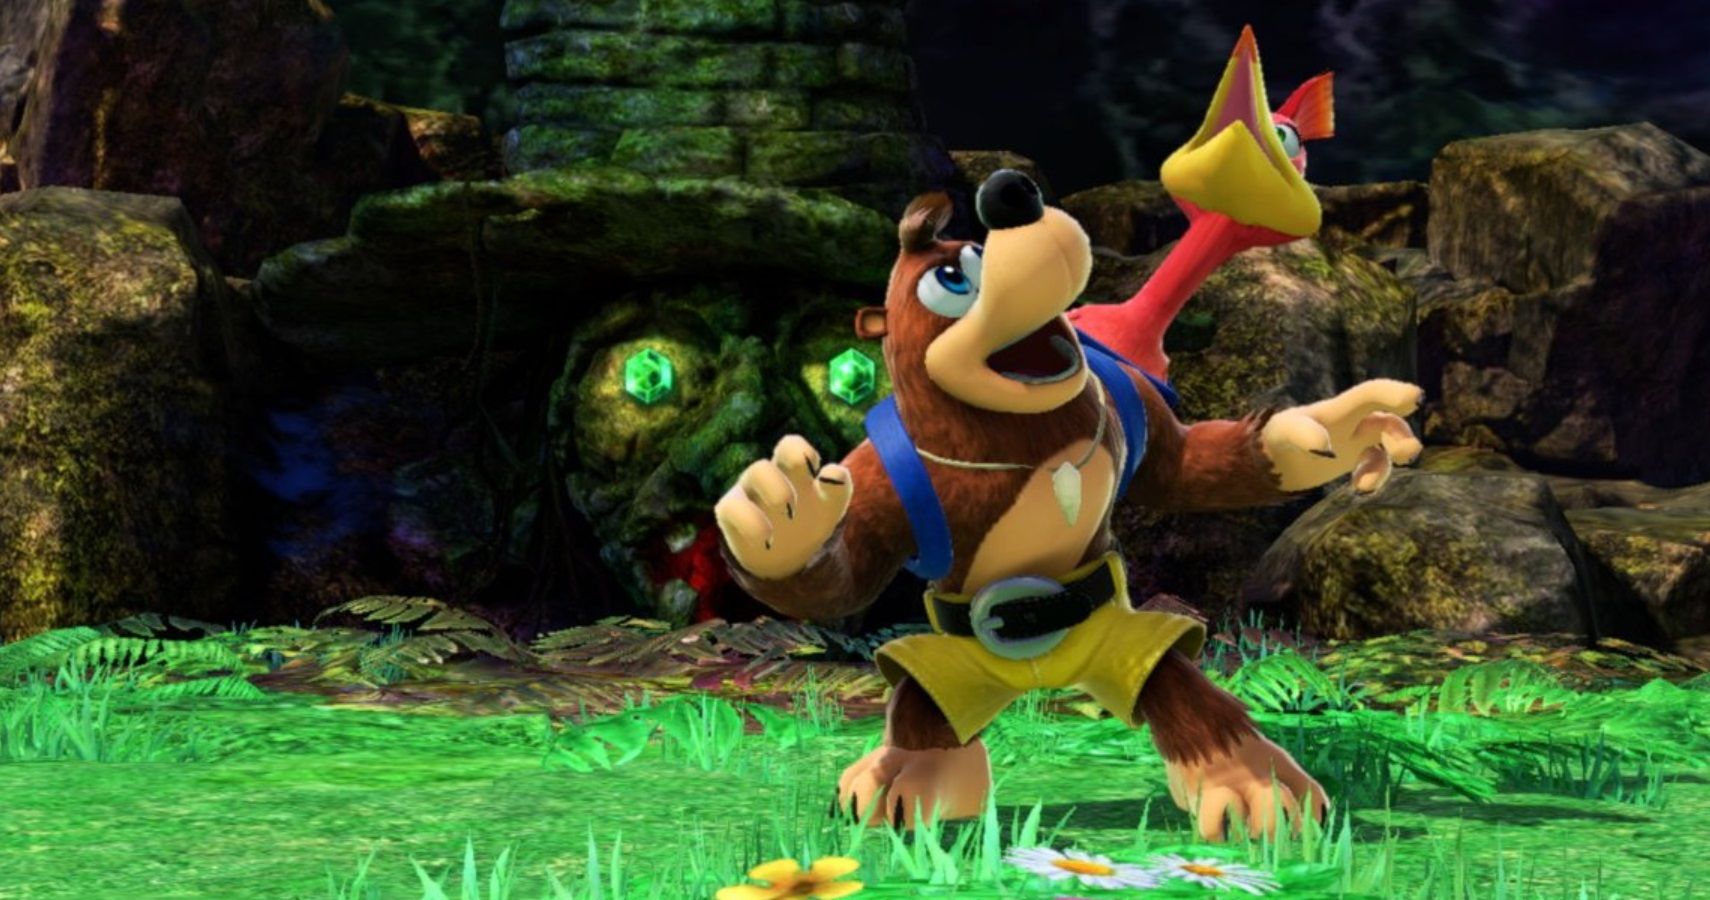 Rare's Banjo-Kazooie Is Rumoured To Be Making A Comeback